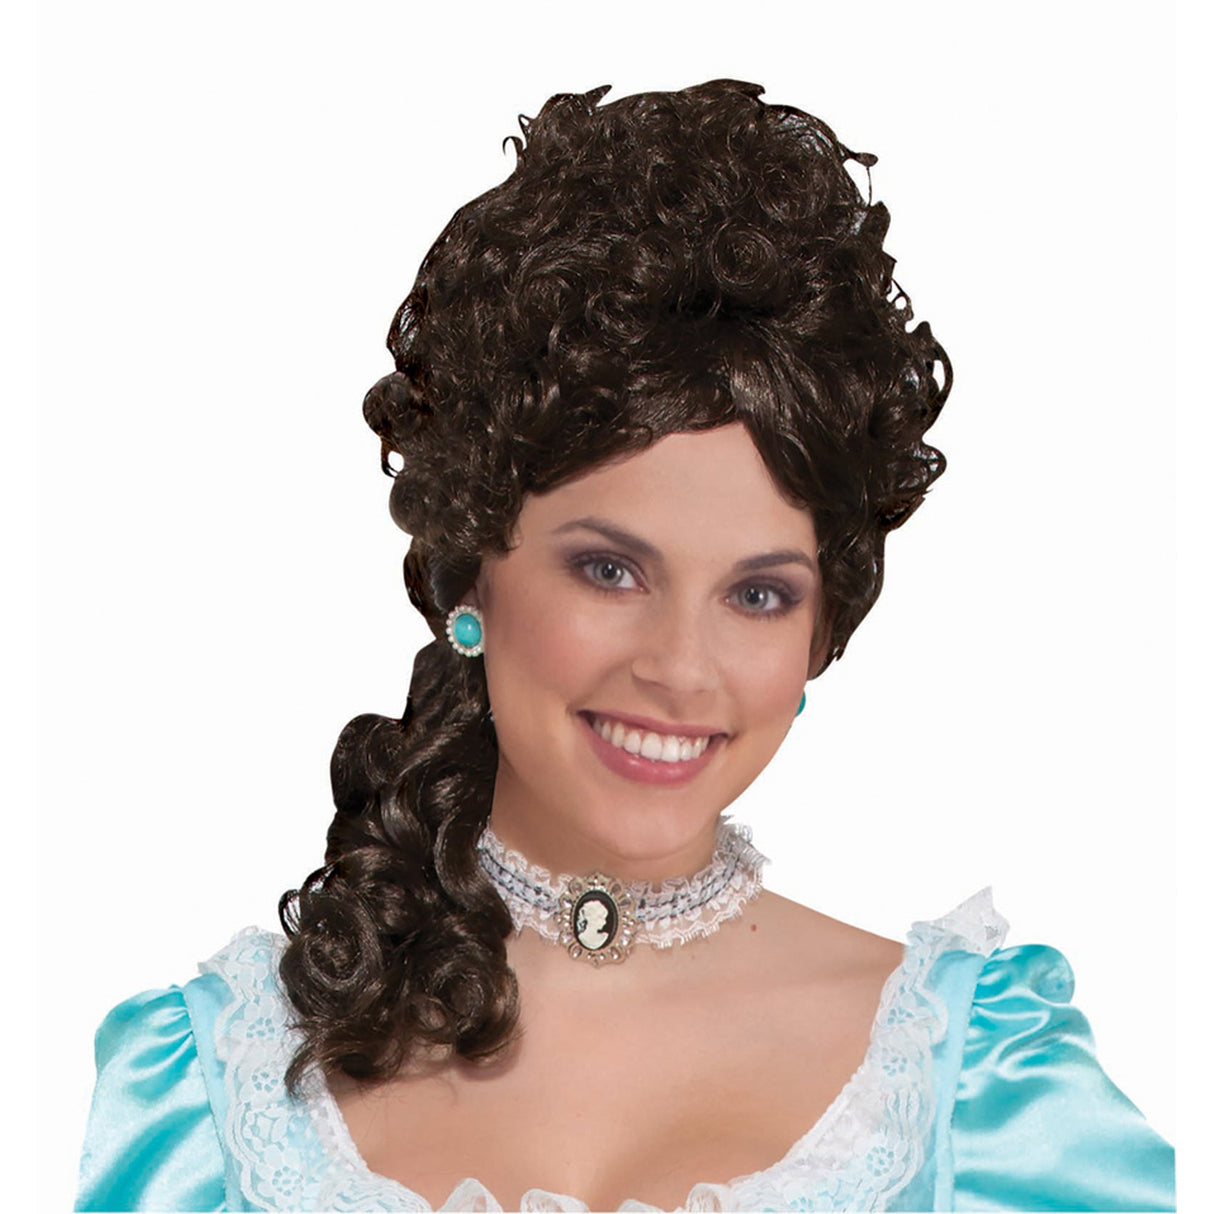 RUBIES II (Ruby Slipper Sales) Costume Accessories Brown Colonial Lady Wig for Adults 721773780929